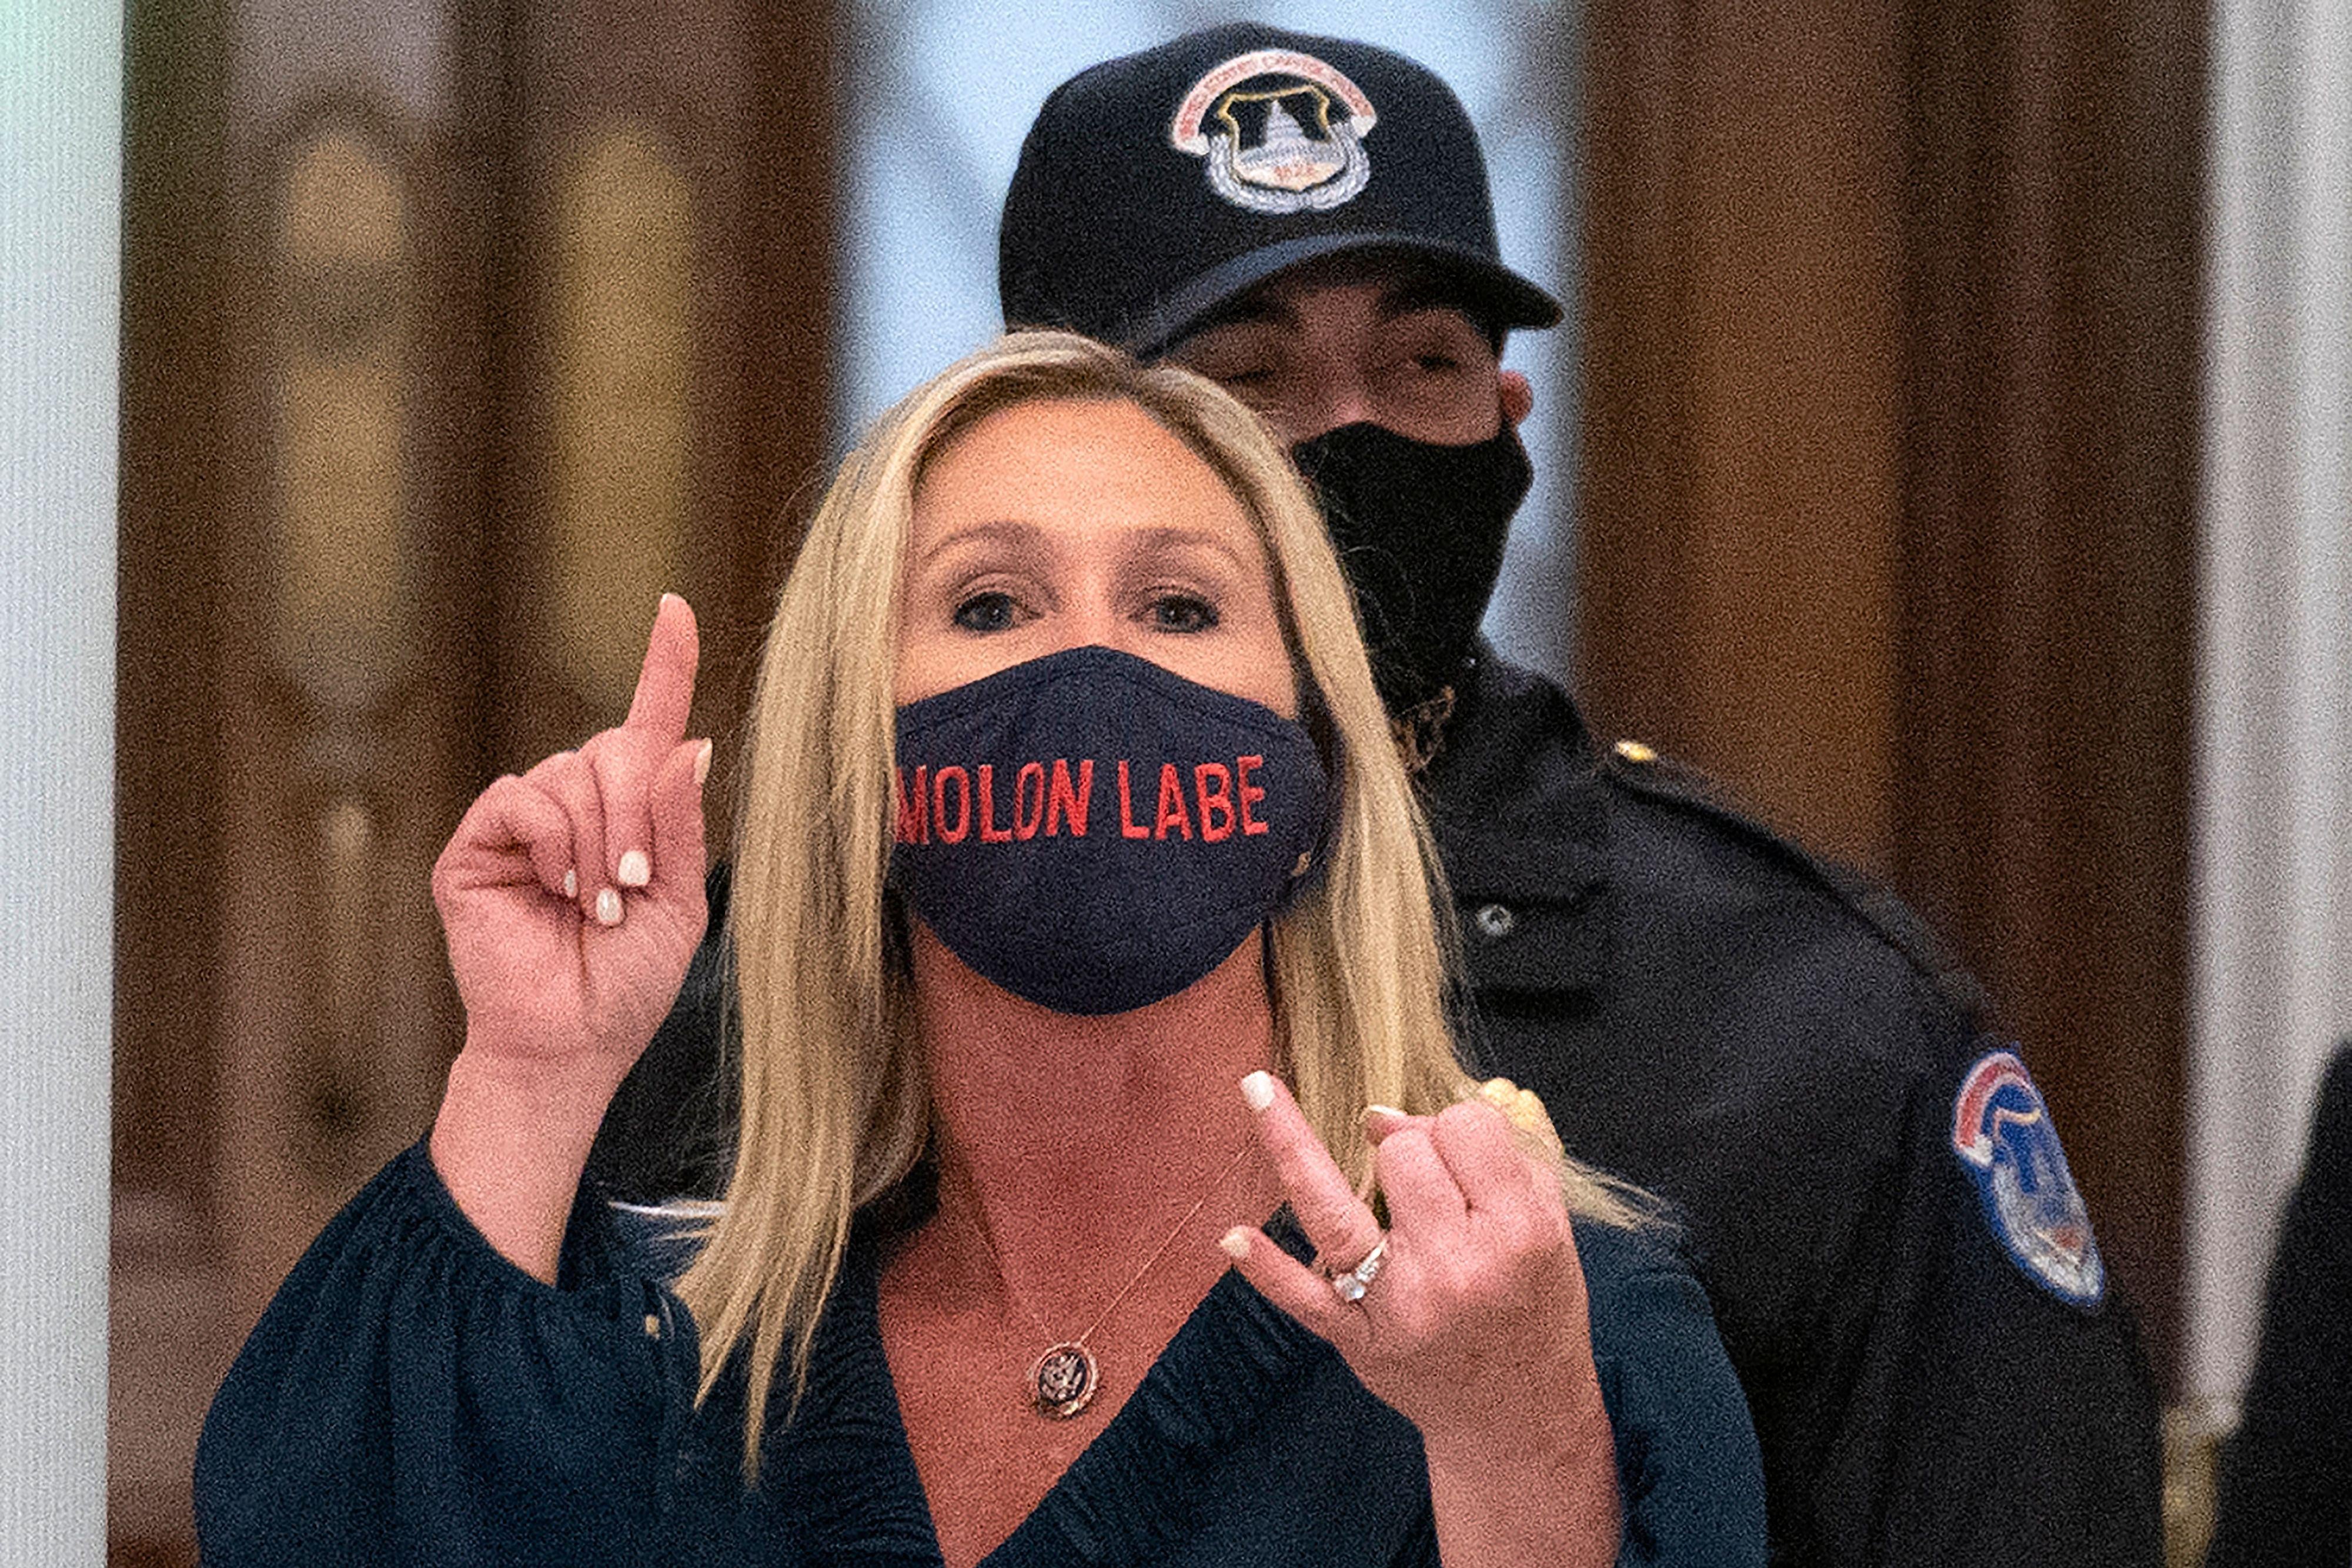 Greene, standing in front of a metal detector, gestures with her hands and wears a mask that says "Molon Labe," which means "come and take them" in Greek.